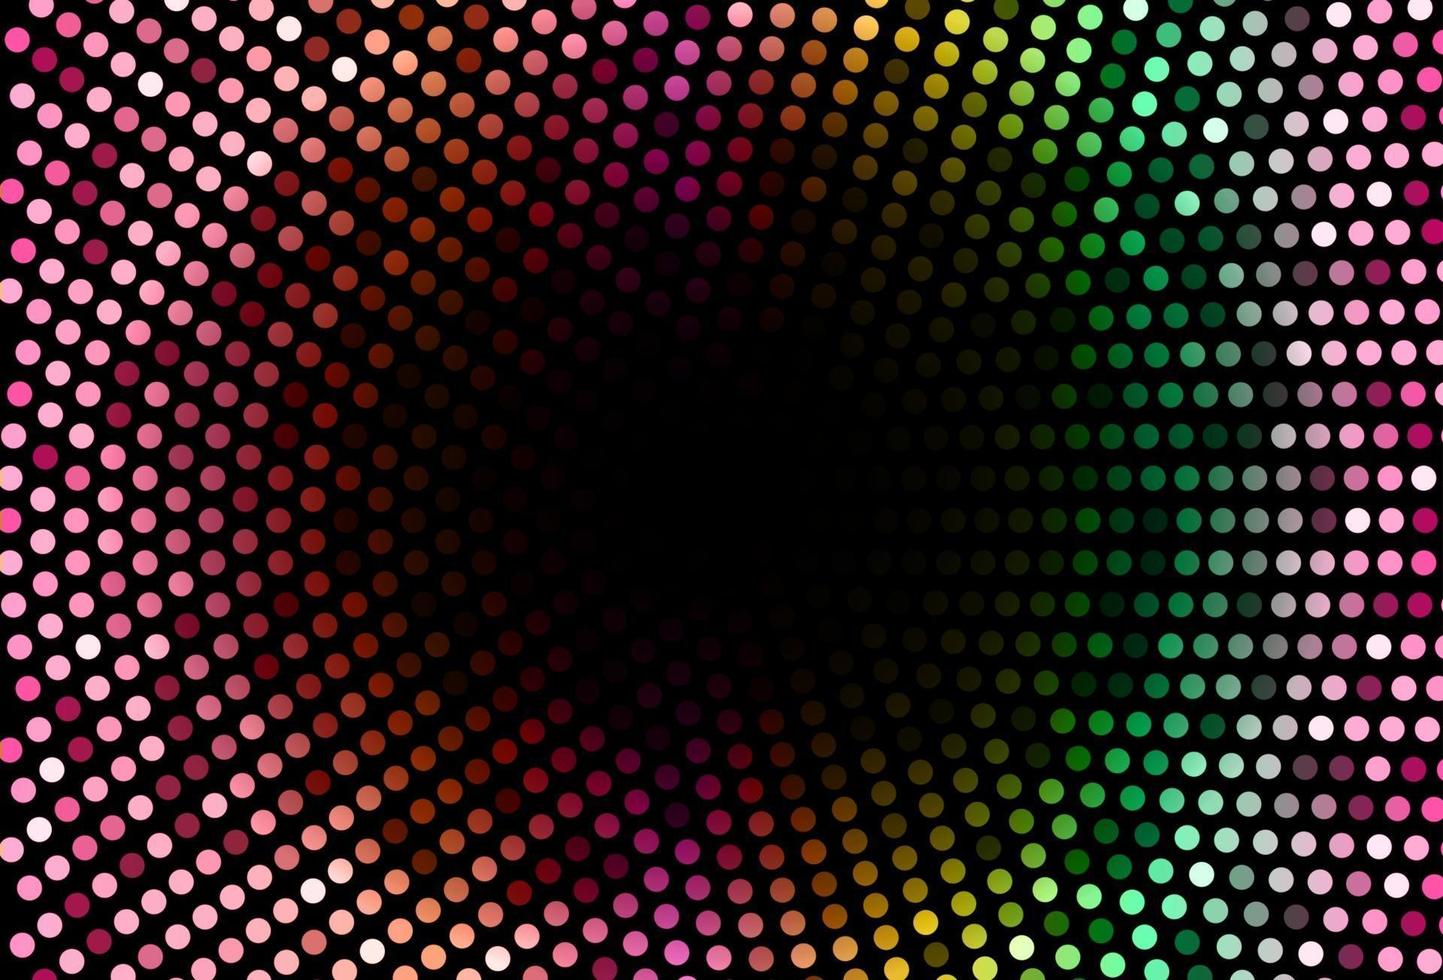 Abstract Glossy Background Design vector